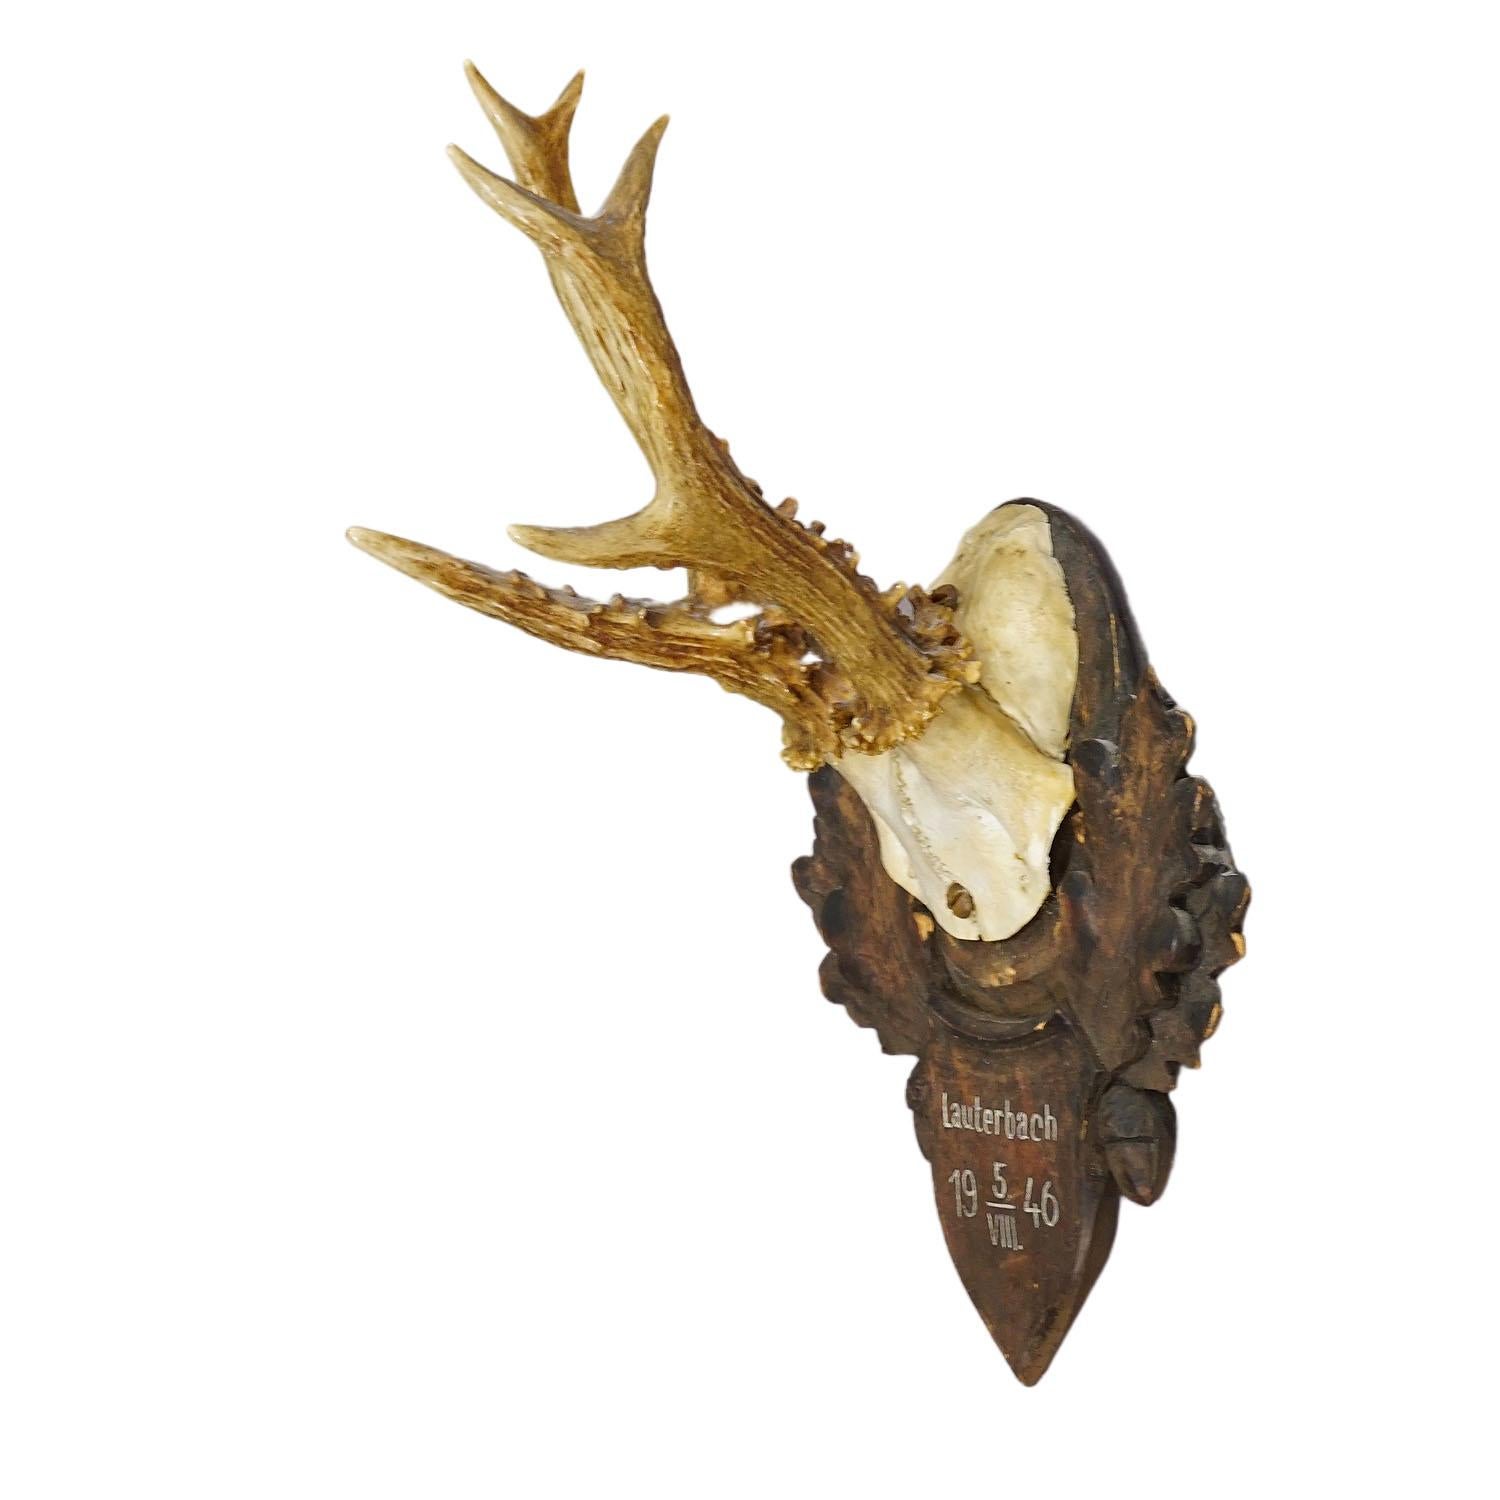 Great Deer Trophy Mount on Wooden Carved Plaque ca. 1946

A large antique deer (Capreolus capreolus) trophy on a wooden carved plaque with dark brown finish. The trophy was shot in 1946. Good condition with handpainted inscription on the